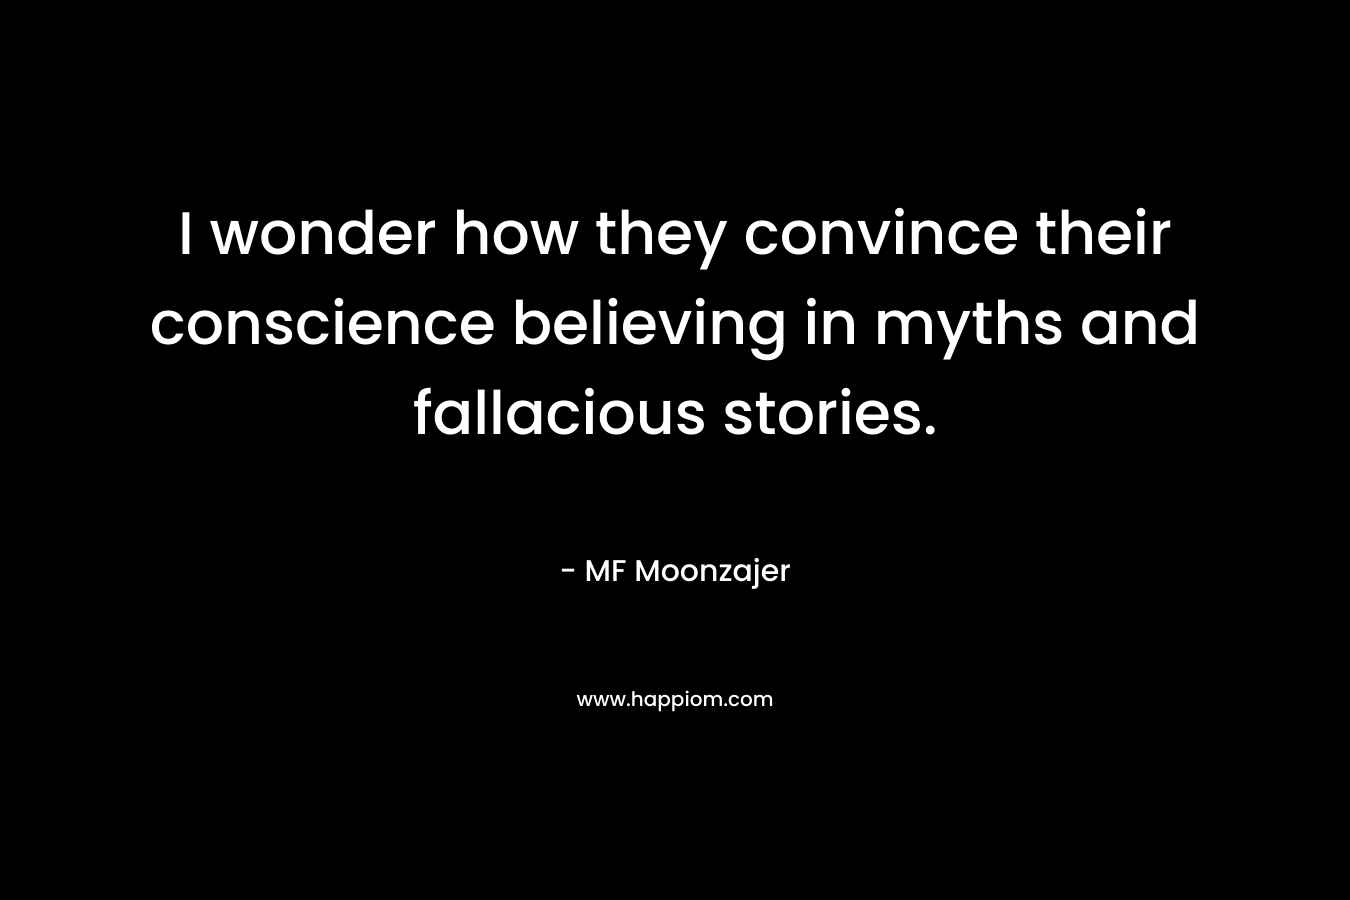 I wonder how they convince their conscience believing in myths and fallacious stories.